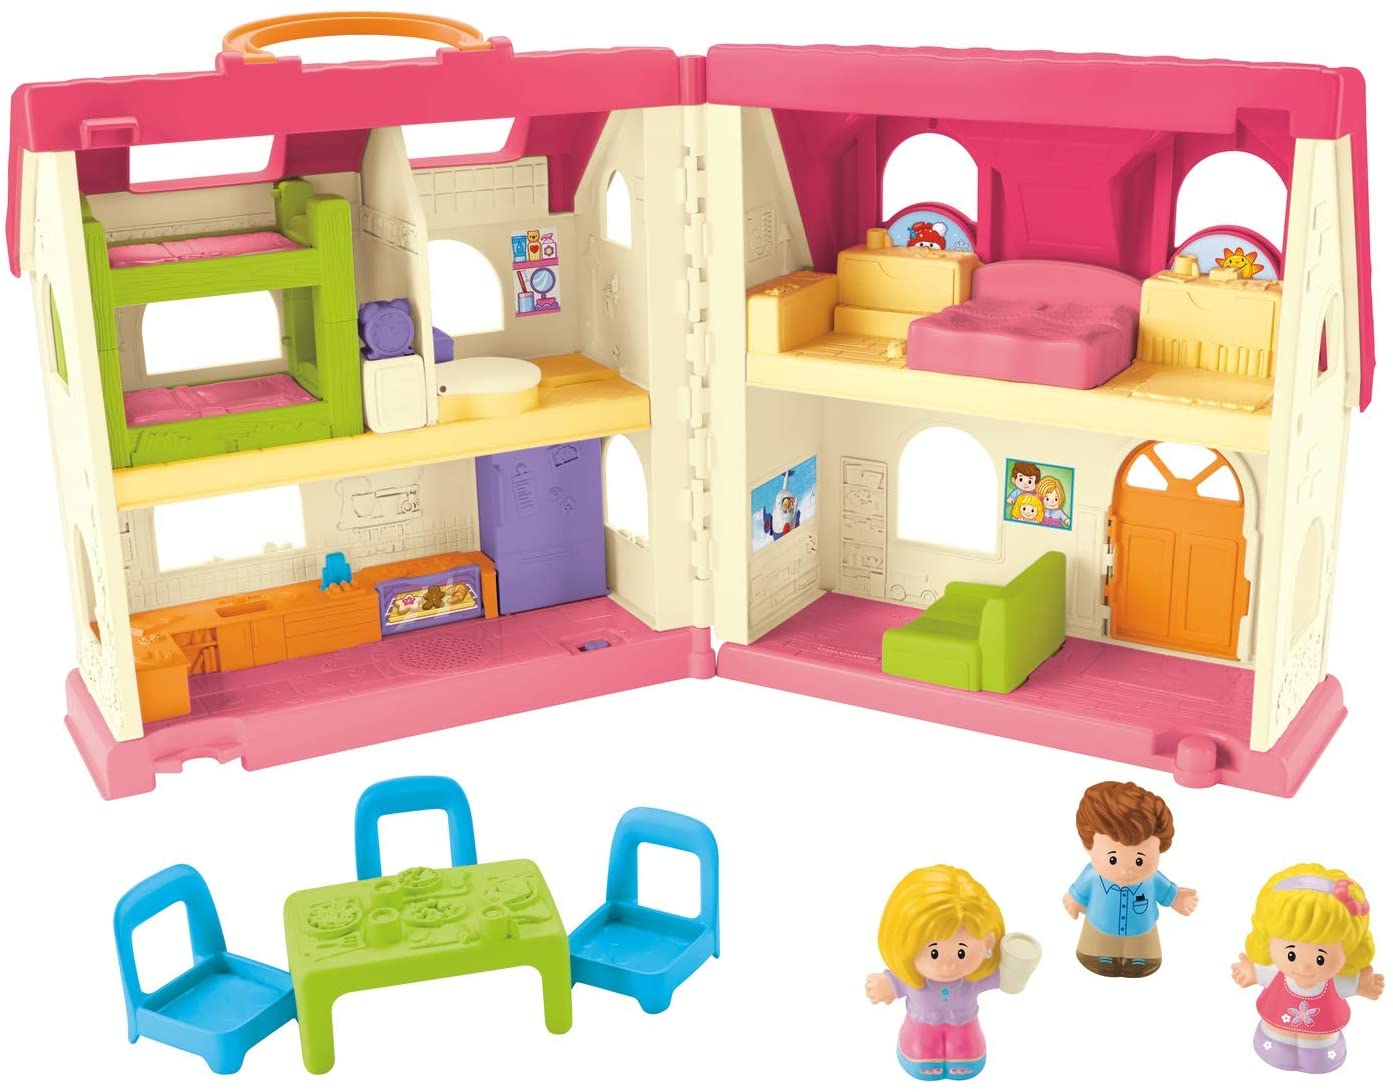 9 Best Fisher Price Little People Toys 2023 - Buying Guide 6